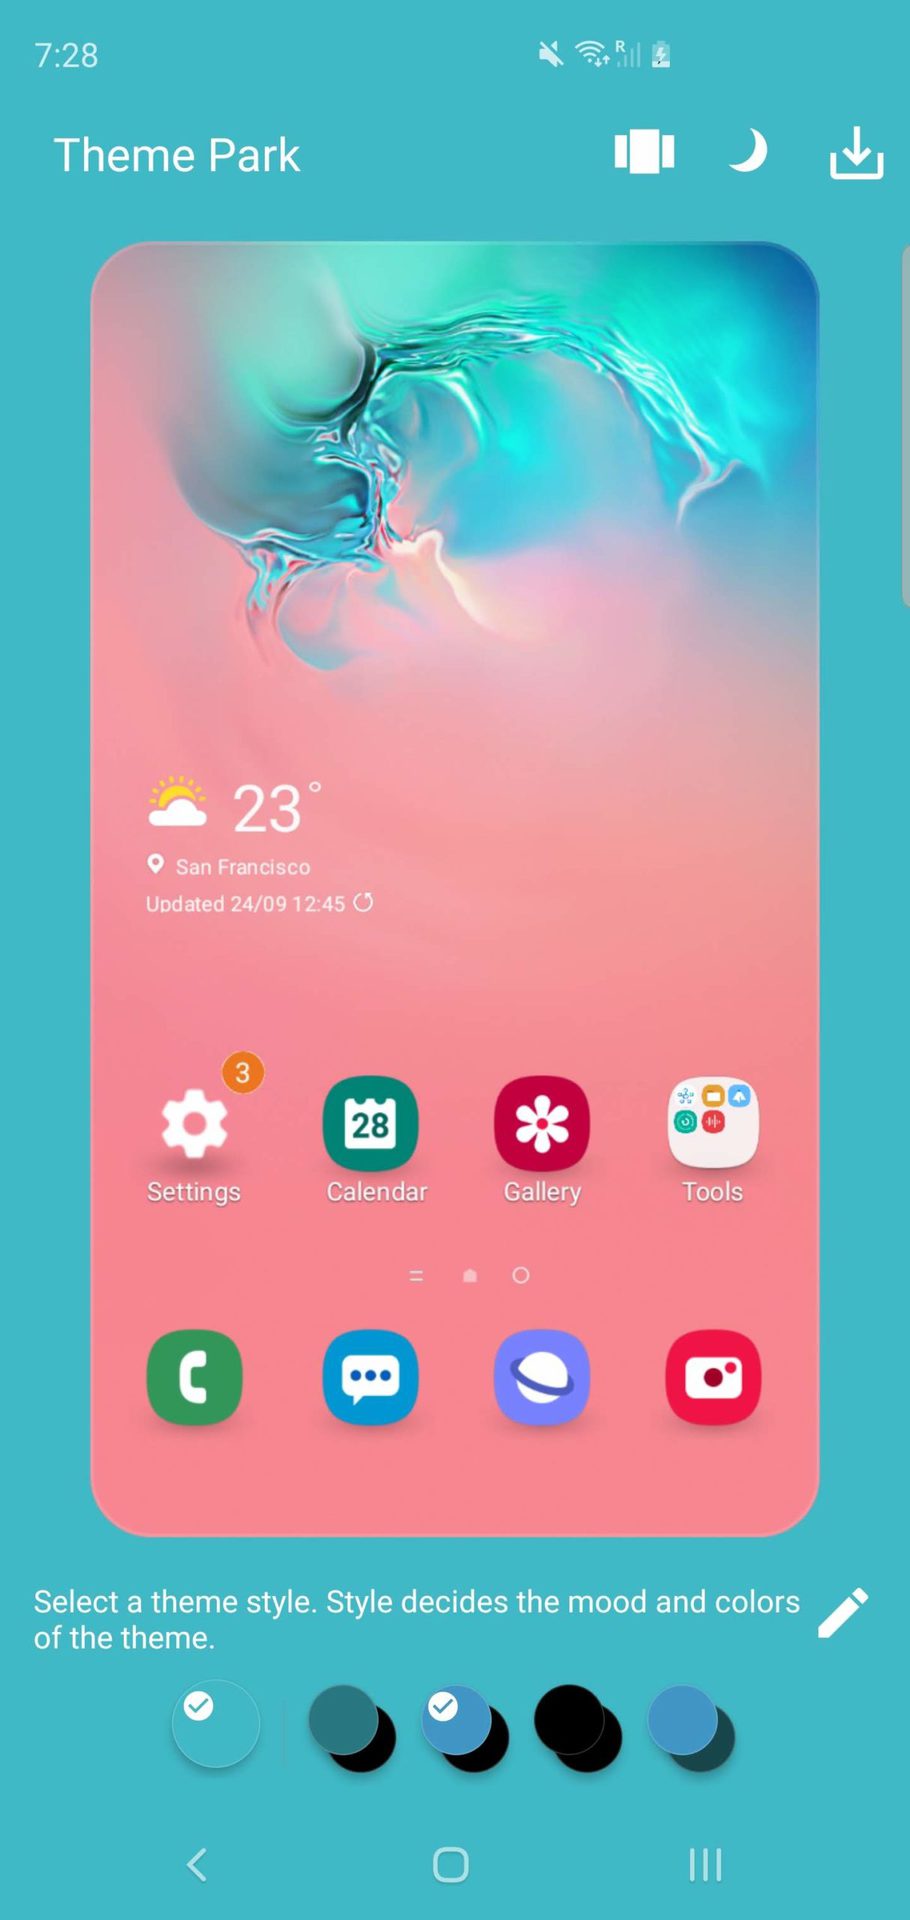 Samsung Theme Park Themes and Style 2